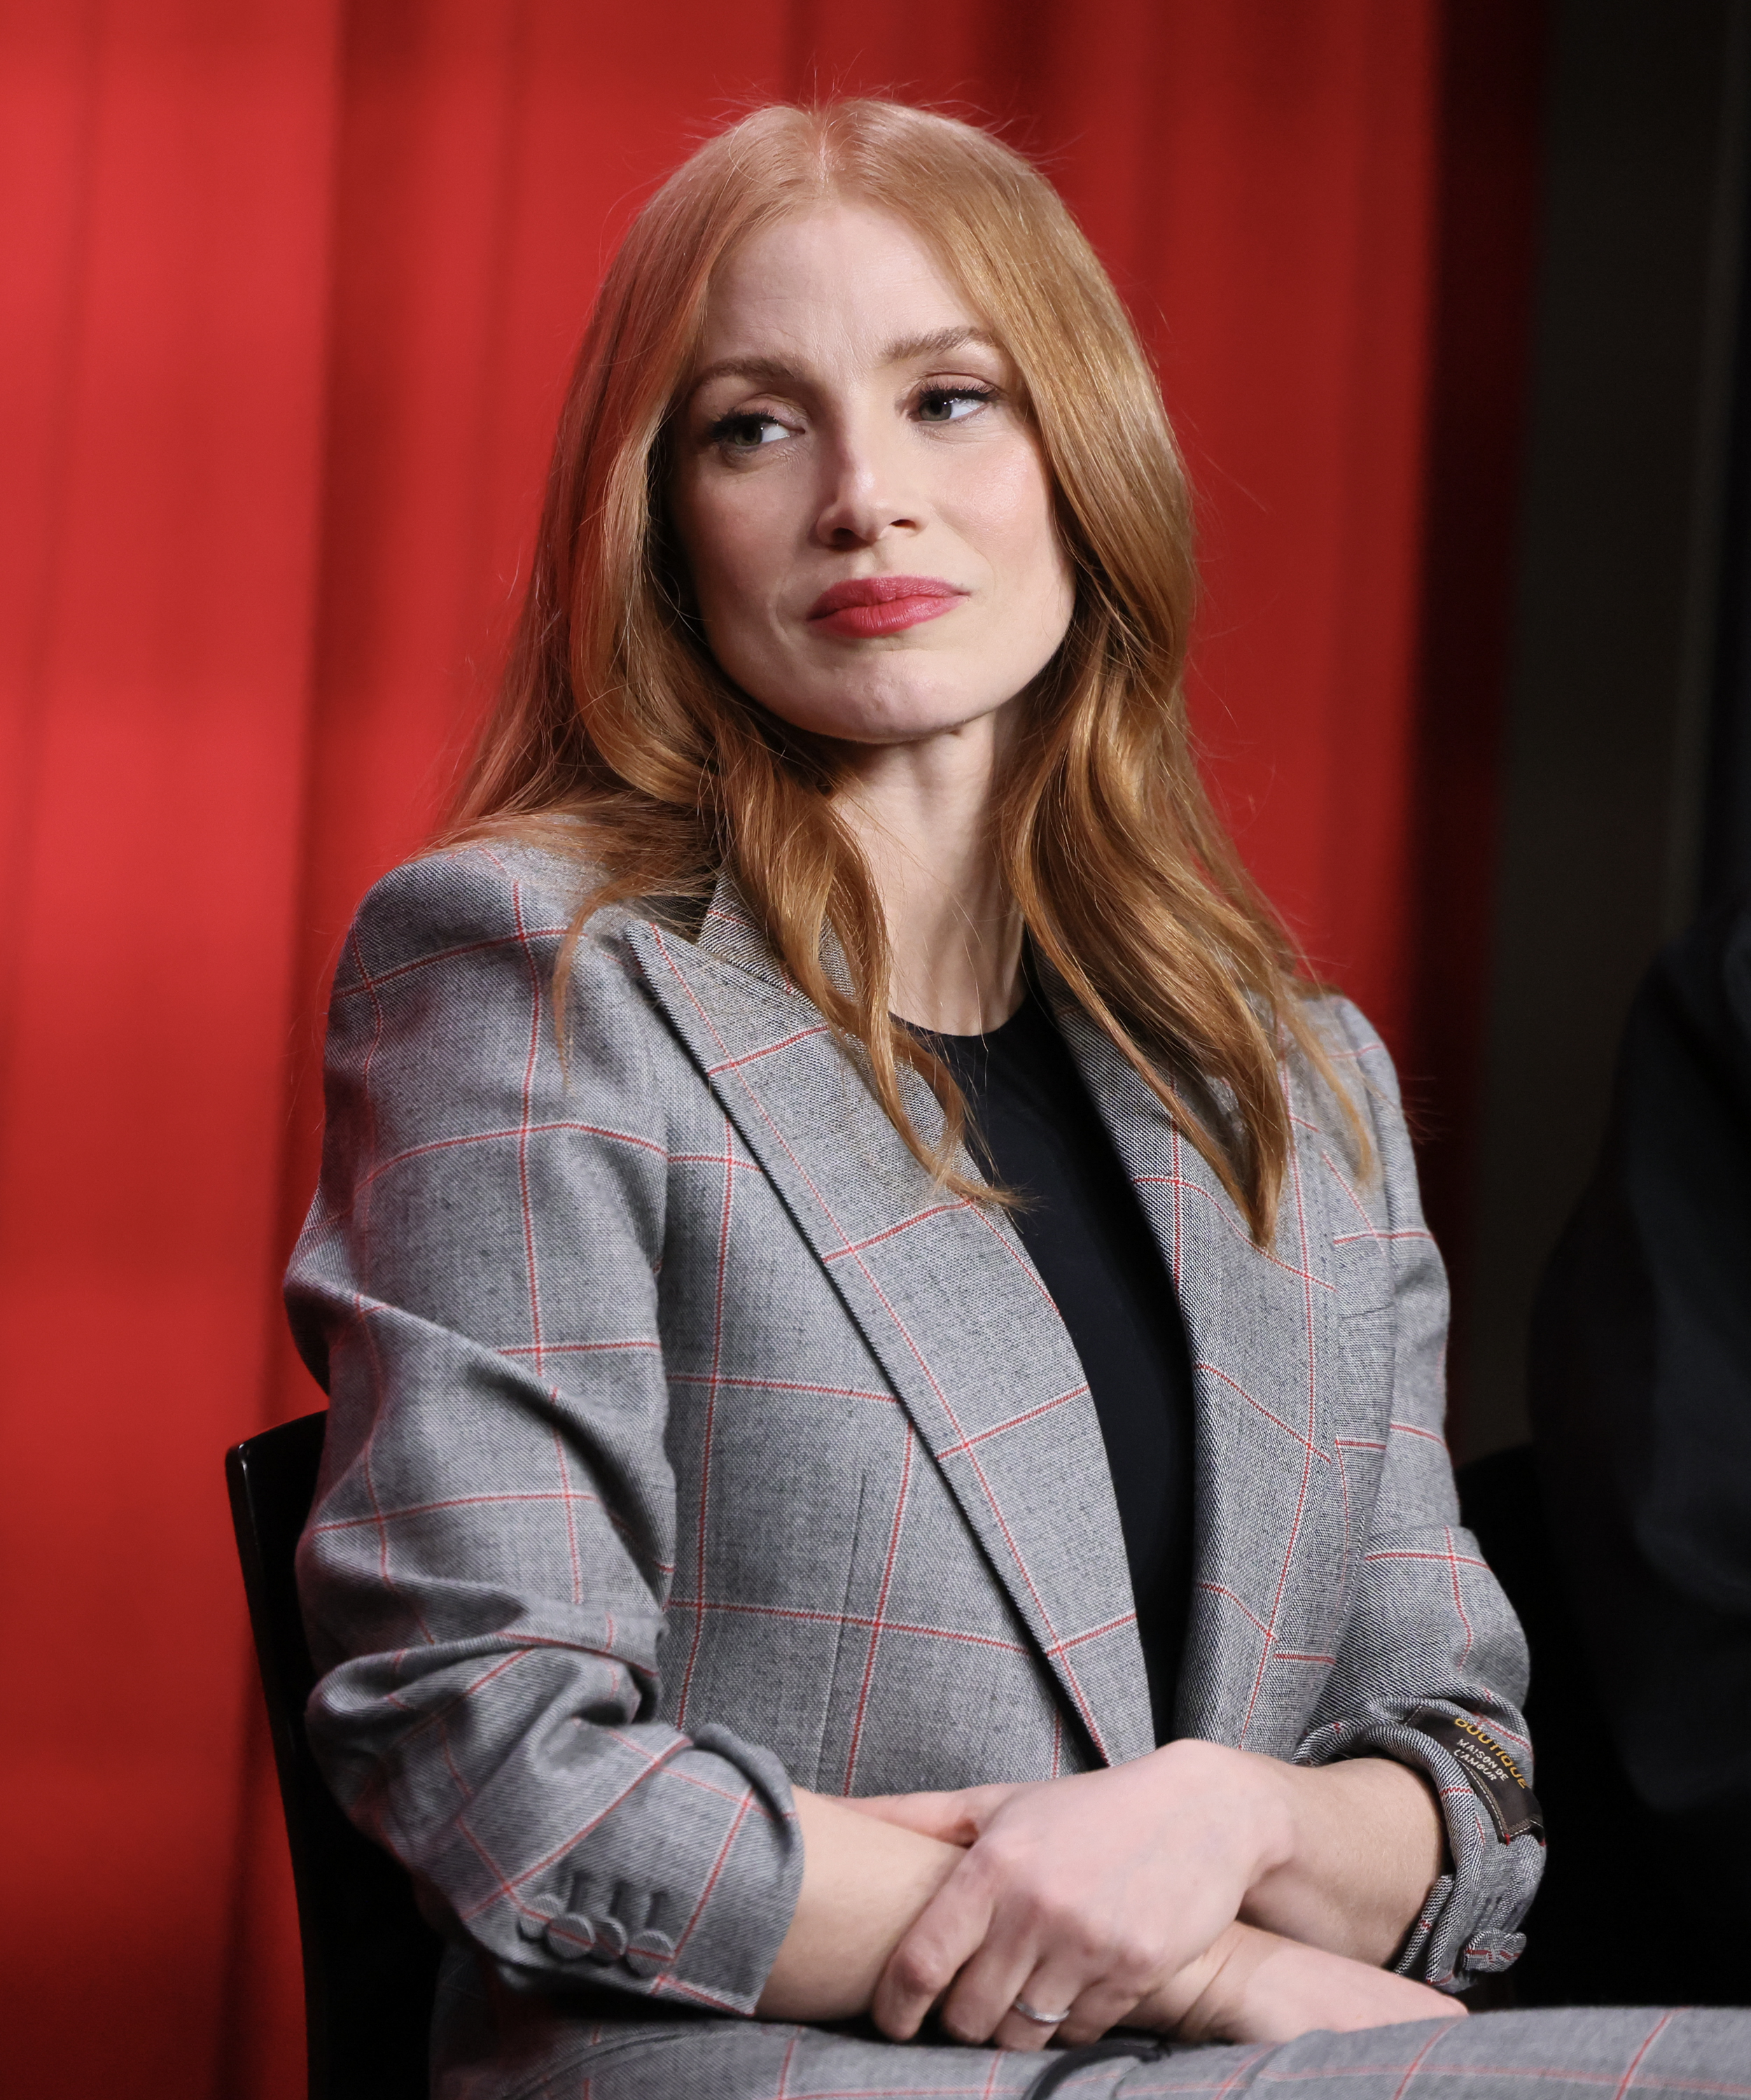 Close-up of Jessica with arms folded and wearing a suit